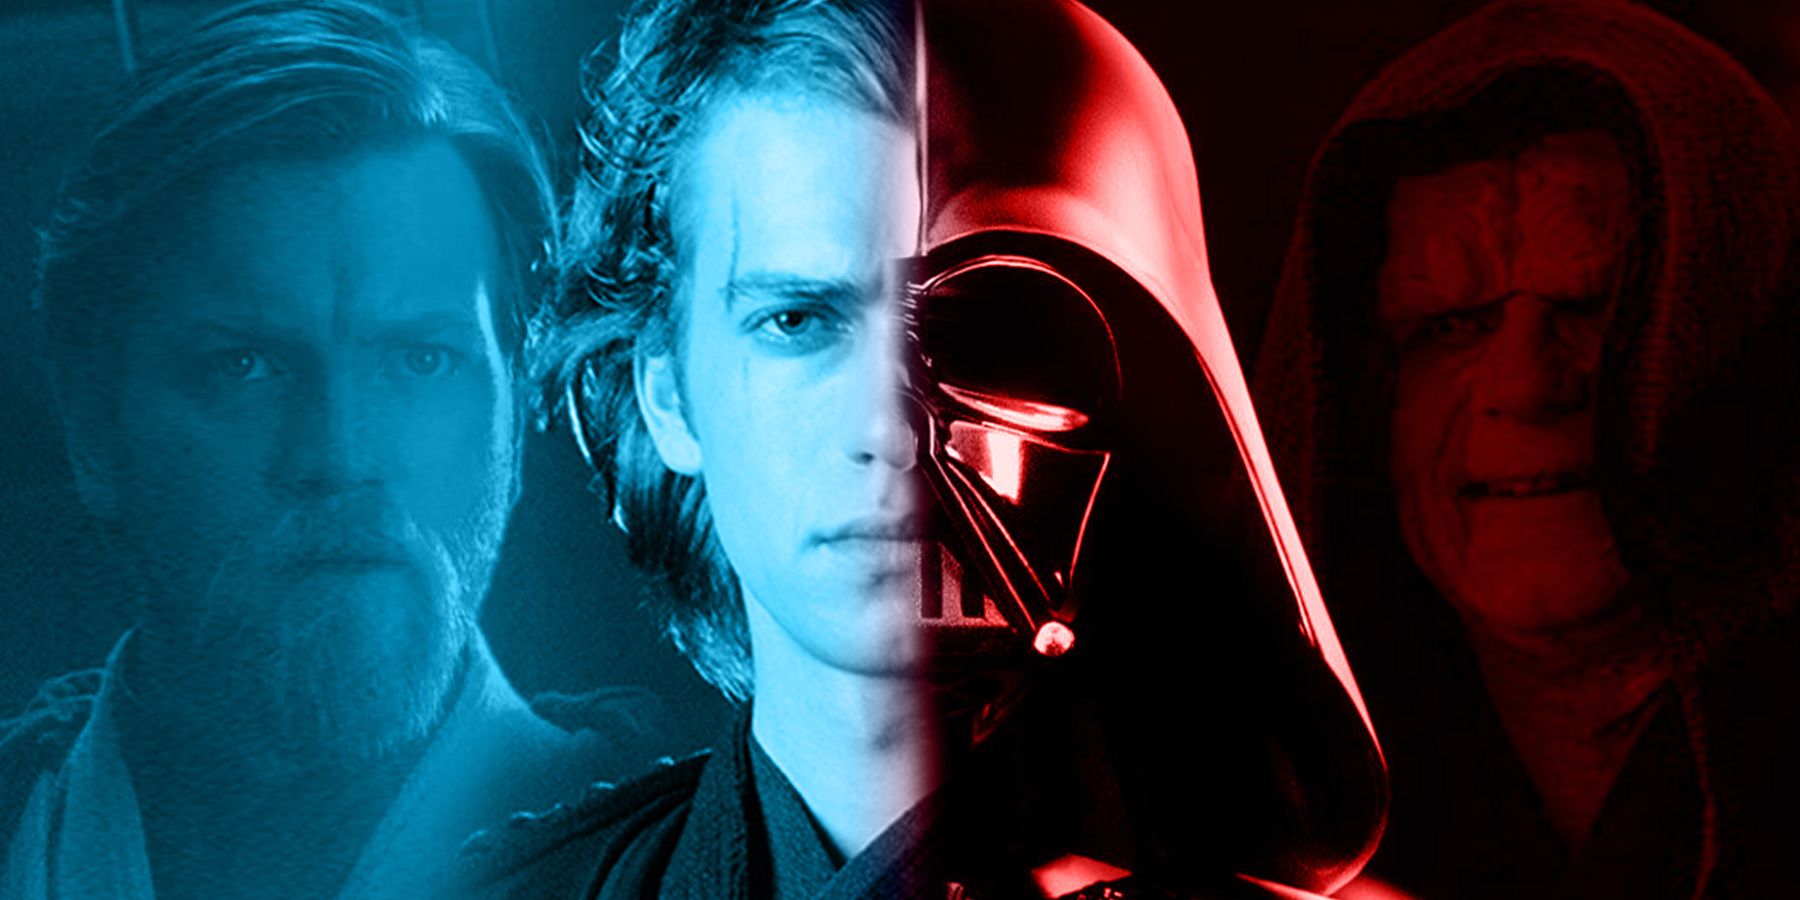 Is Darth Vader Separate From Anakin